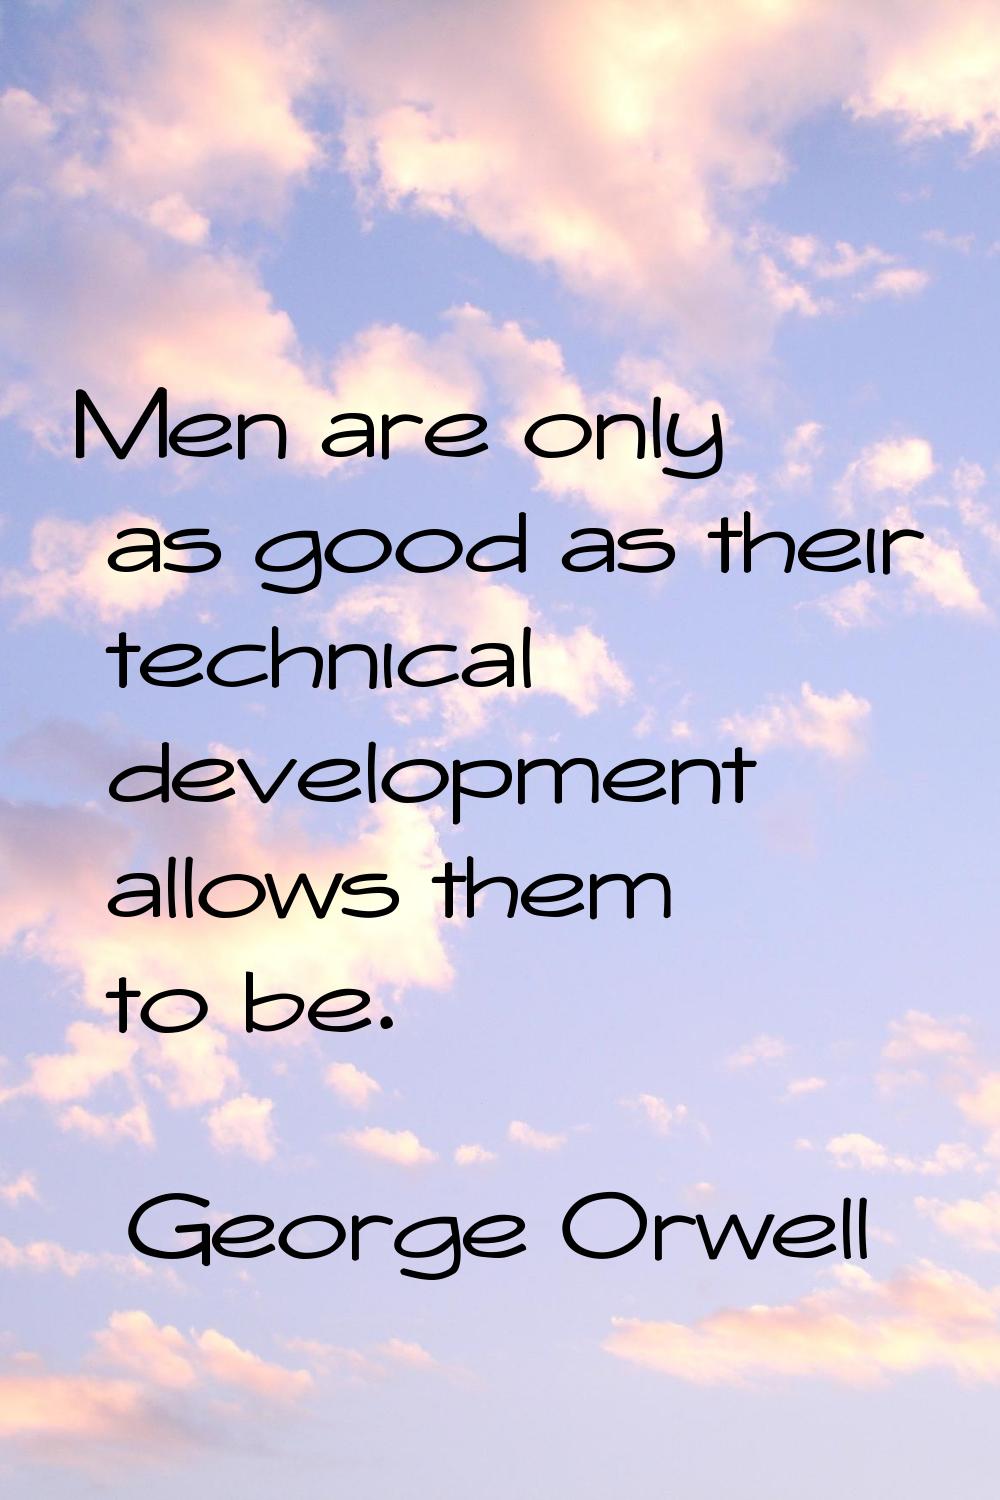 Men are only as good as their technical development allows them to be.